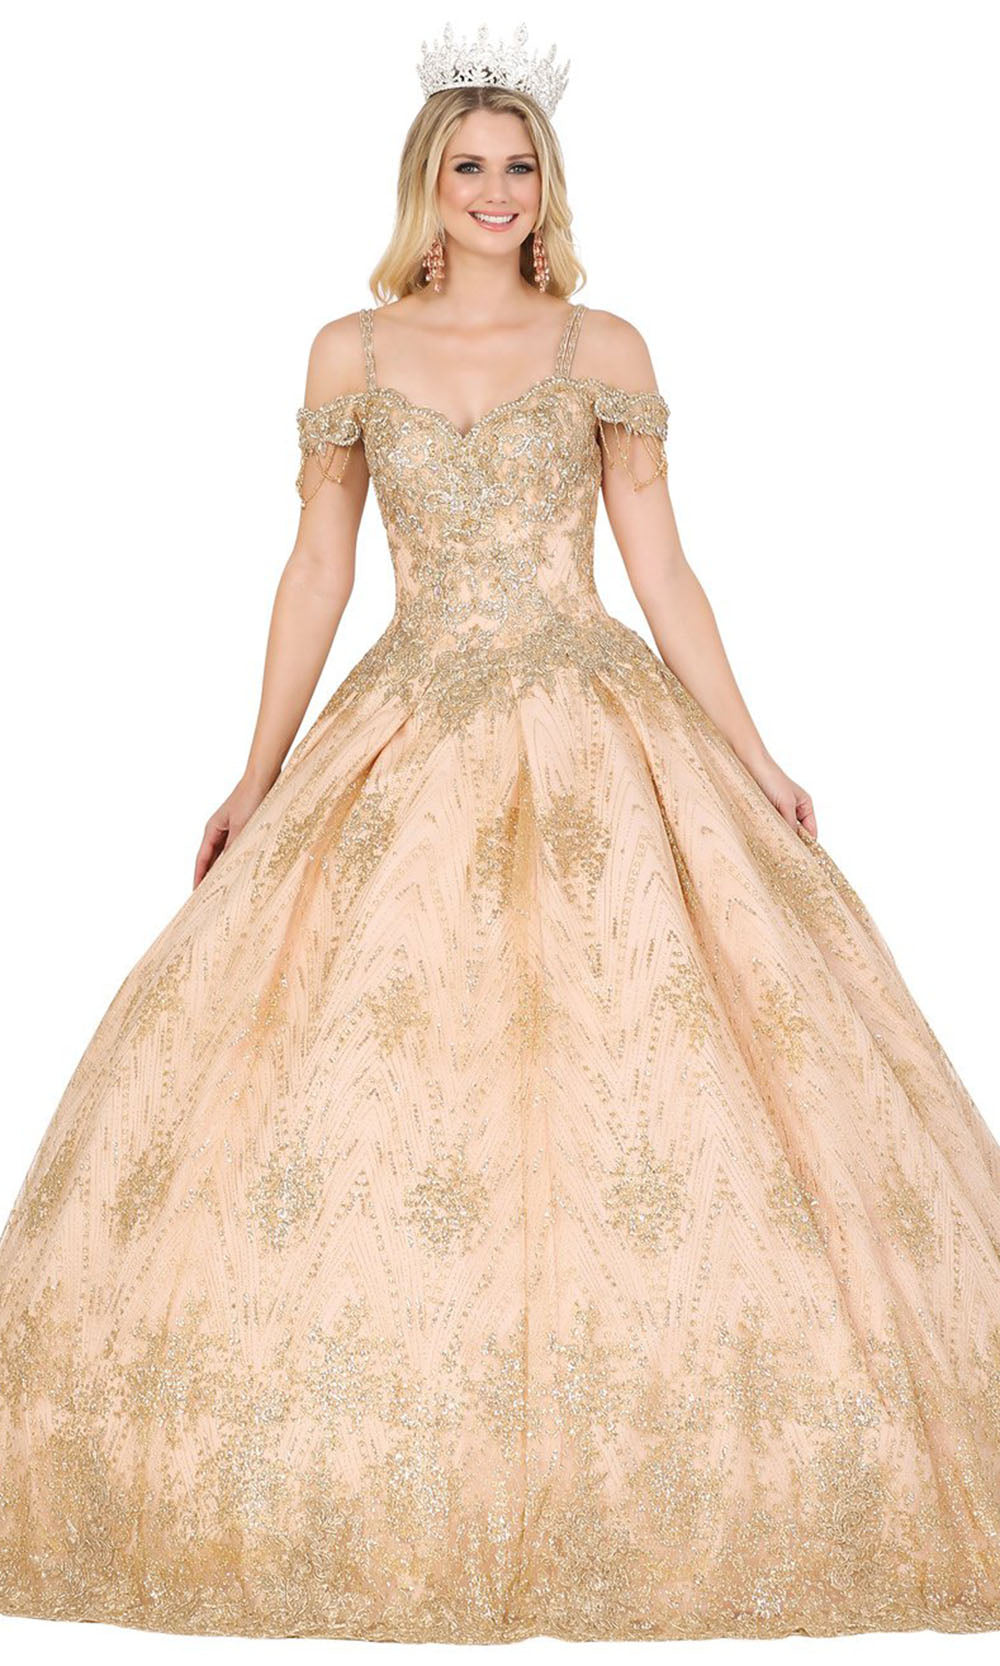 Dancing Queen - 1509 Bead Garlanded Cold Shoulder Ballgown In Champagne & Gold